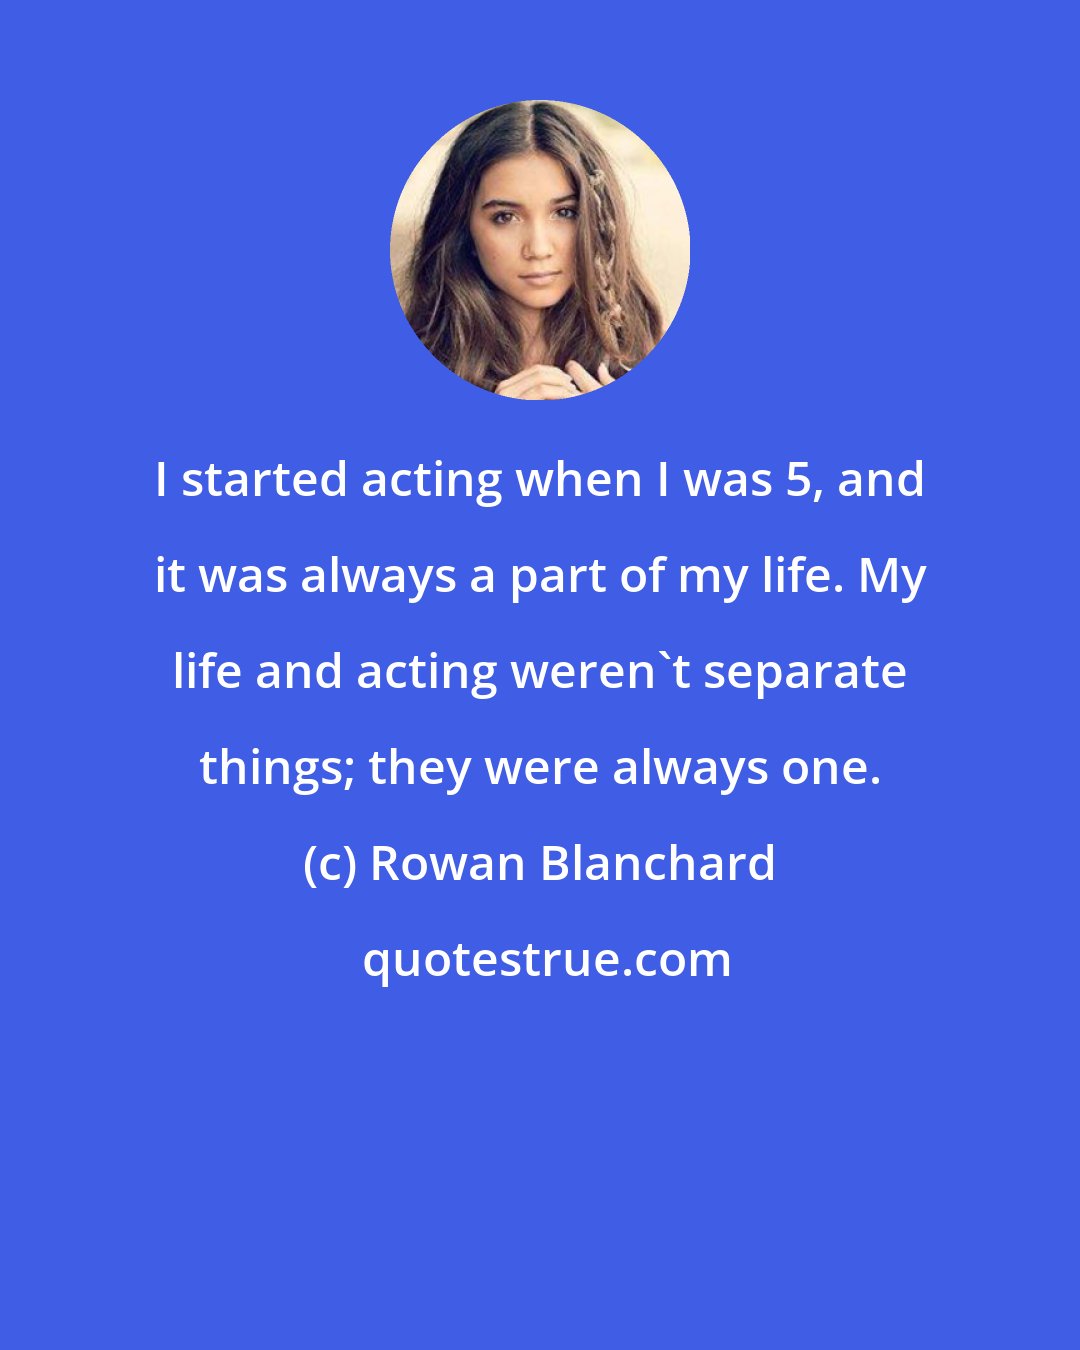 Rowan Blanchard: I started acting when I was 5, and it was always a part of my life. My life and acting weren't separate things; they were always one.